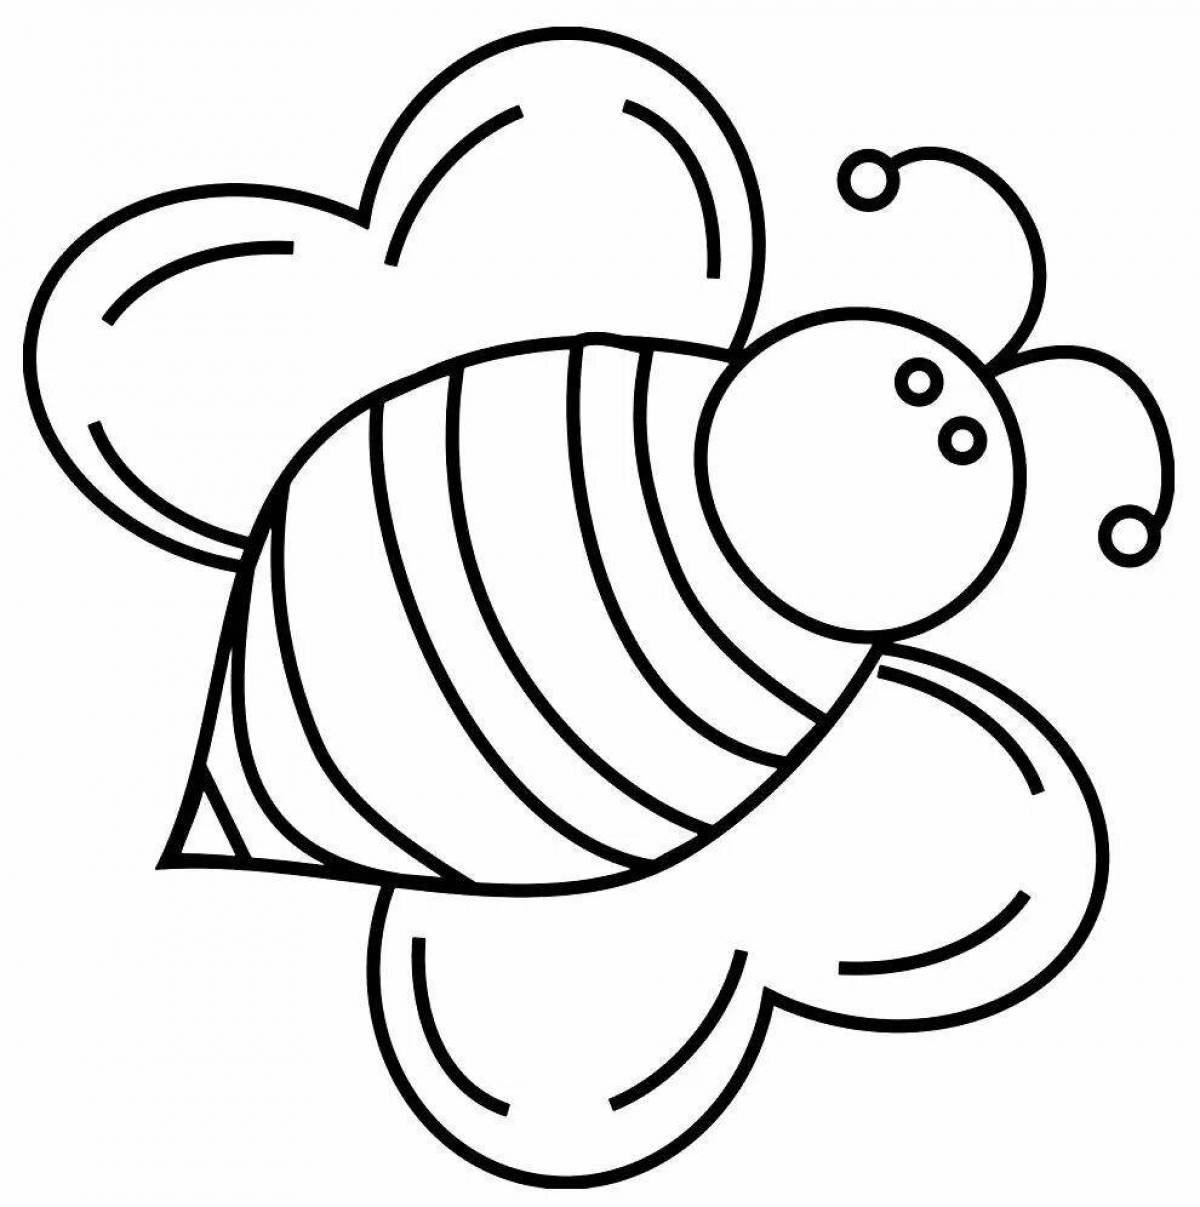 Unique bee coloring page for 6-7 year olds